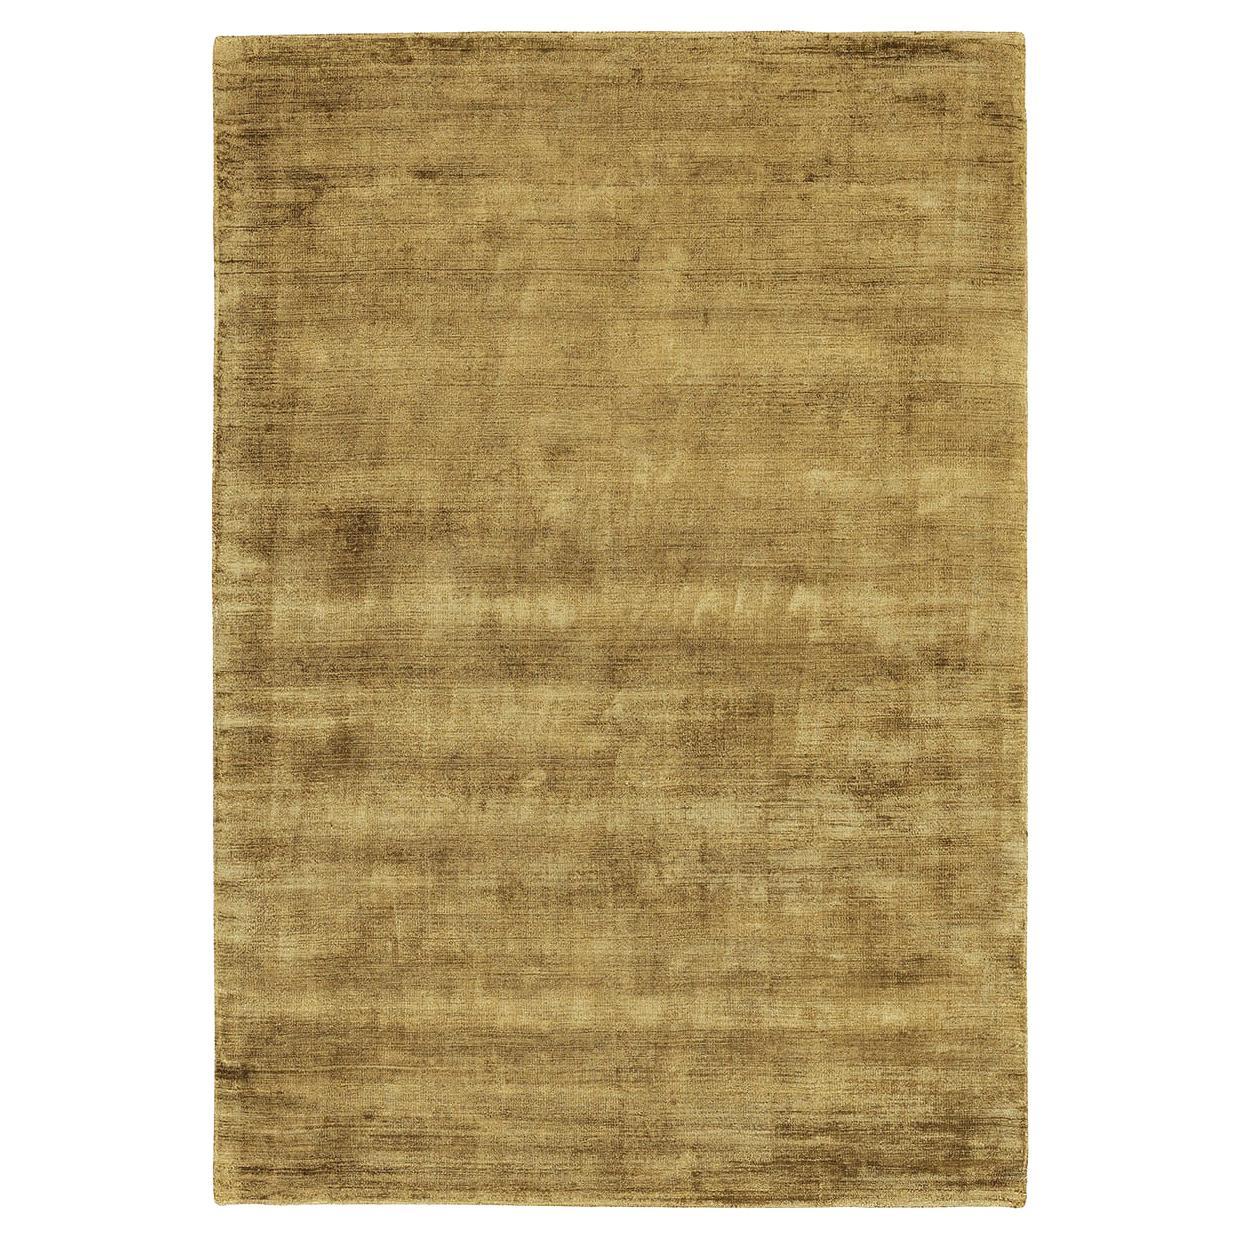 Trendy Shiny Gold Rug For Sale